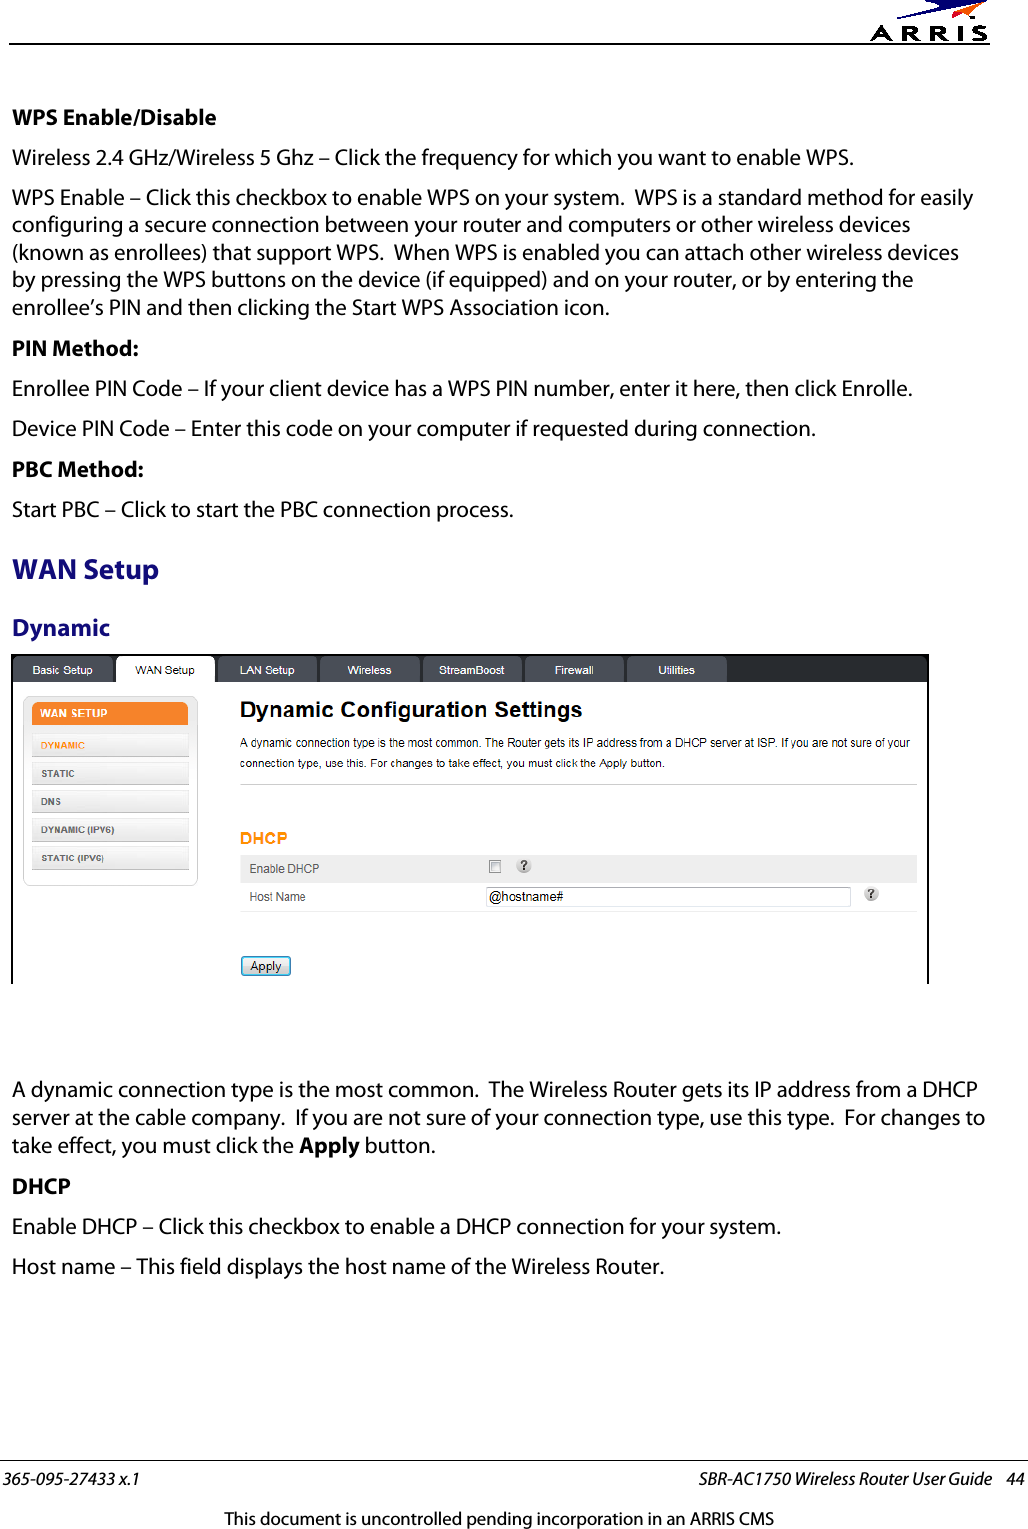      365-095-27433 x.1 SBR-AC1750 Wireless Router User Guide    44 This document is uncontrolled pending incorporation in an ARRIS CMS WPS Enable/Disable Wireless 2.4 GHz/Wireless 5 Ghz – Click the frequency for which you want to enable WPS. WPS Enable – Click this checkbox to enable WPS on your system.  WPS is a standard method for easily configuring a secure connection between your router and computers or other wireless devices (known as enrollees) that support WPS.  When WPS is enabled you can attach other wireless devices by pressing the WPS buttons on the device (if equipped) and on your router, or by entering the enrollee’s PIN and then clicking the Start WPS Association icon. PIN Method: Enrollee PIN Code – If your client device has a WPS PIN number, enter it here, then click Enrolle. Device PIN Code – Enter this code on your computer if requested during connection. PBC Method: Start PBC – Click to start the PBC connection process.   WAN Setup Dynamic    A dynamic connection type is the most common.  The Wireless Router gets its IP address from a DHCP server at the cable company.  If you are not sure of your connection type, use this type.  For changes to take effect, you must click the Apply button. DHCP Enable DHCP – Click this checkbox to enable a DHCP connection for your system. Host name – This field displays the host name of the Wireless Router.   